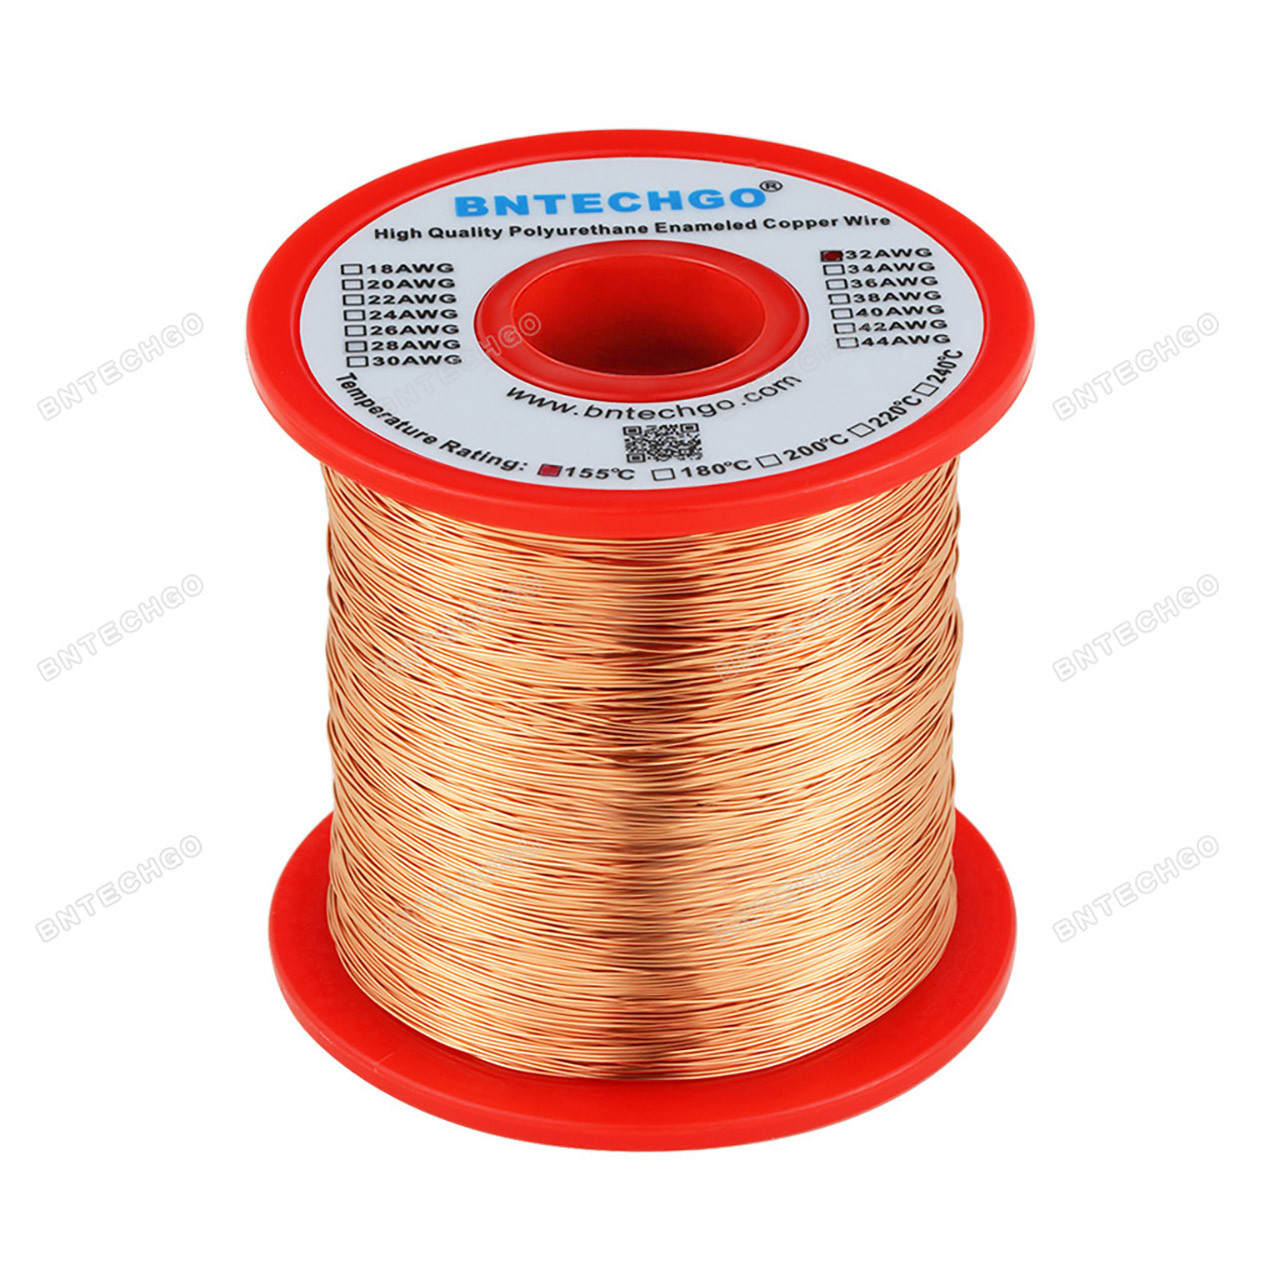 18 AWG 18 Gauge Enameled Magnet Wire 10LBS - Applied Magnets - Magnet4less